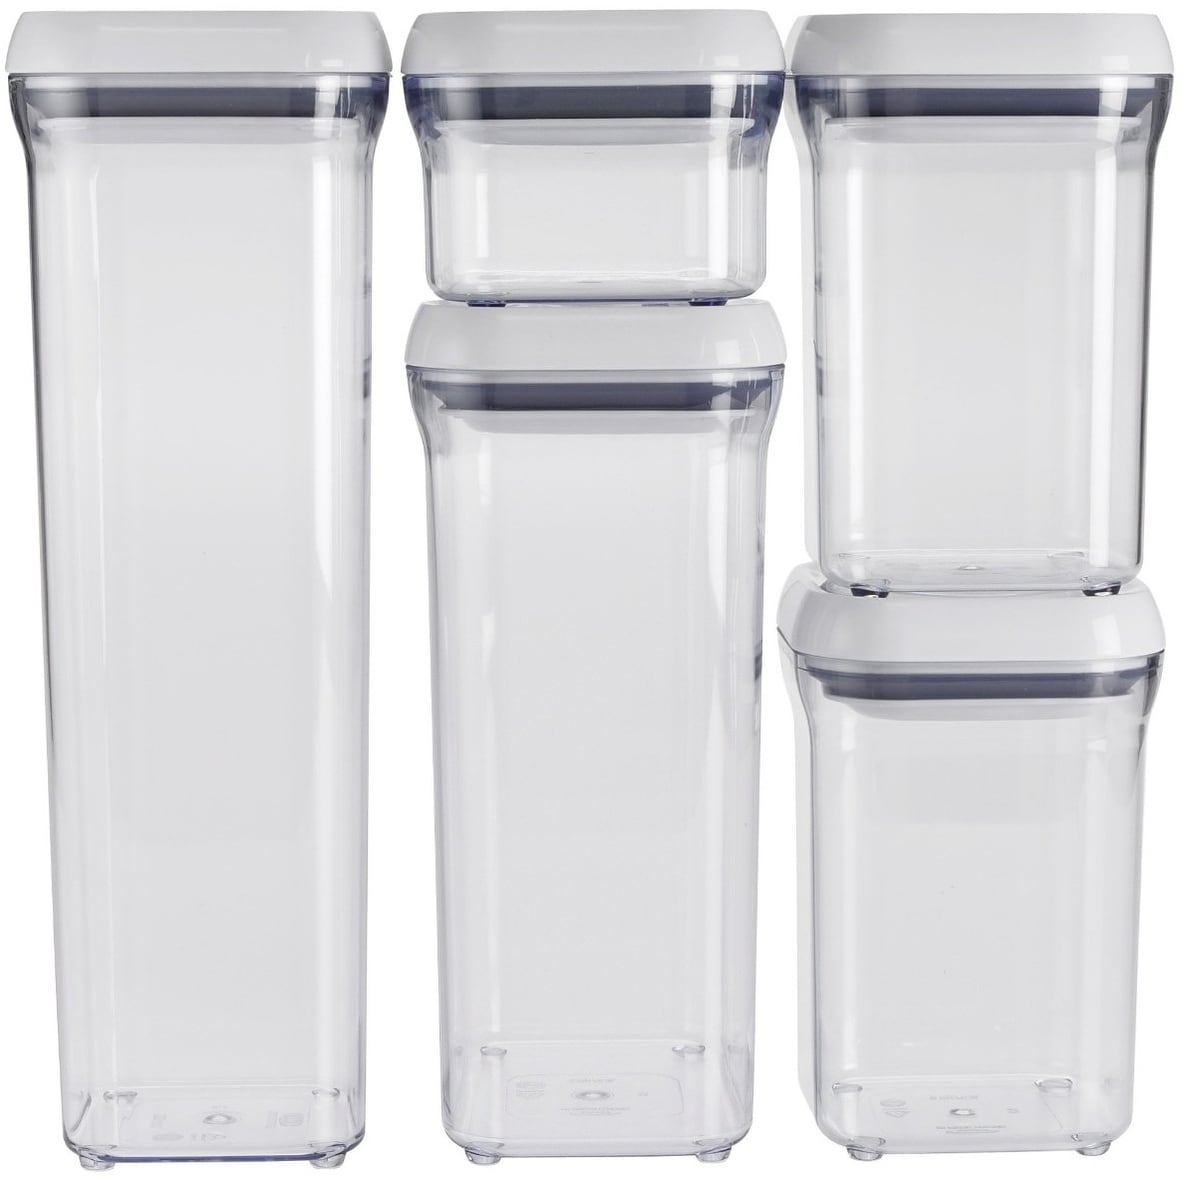 https://ak1.ostkcdn.com/images/products/is/images/direct/489f6624d8af39a9f7c582b1f4b12e218a4d21db/OXO-Good-Grips-Pop-Airtight-Container-Set%2C-5-Piece.jpg